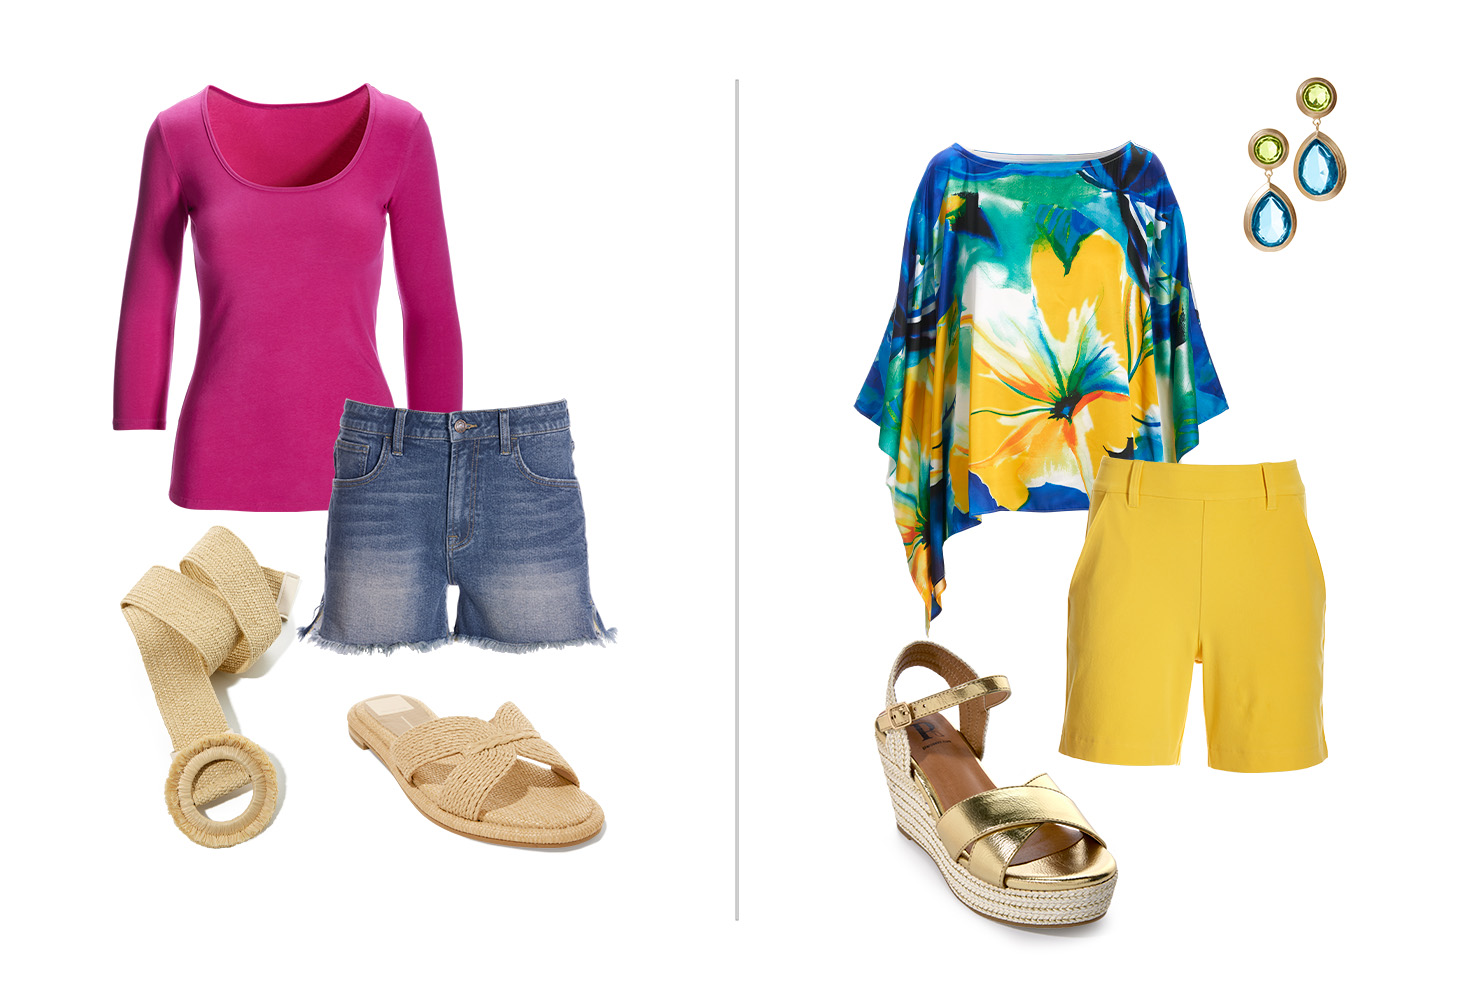 Left panel shows a pink scoop-neck three-quarter sleeve top, denim shorts, tan raffia belt, and tan raffia slides. Right panel shows a blue, yellow, and green printed slouchy charmeuse blouse, yellow shorts., gold wedges, and blue and green earrings.